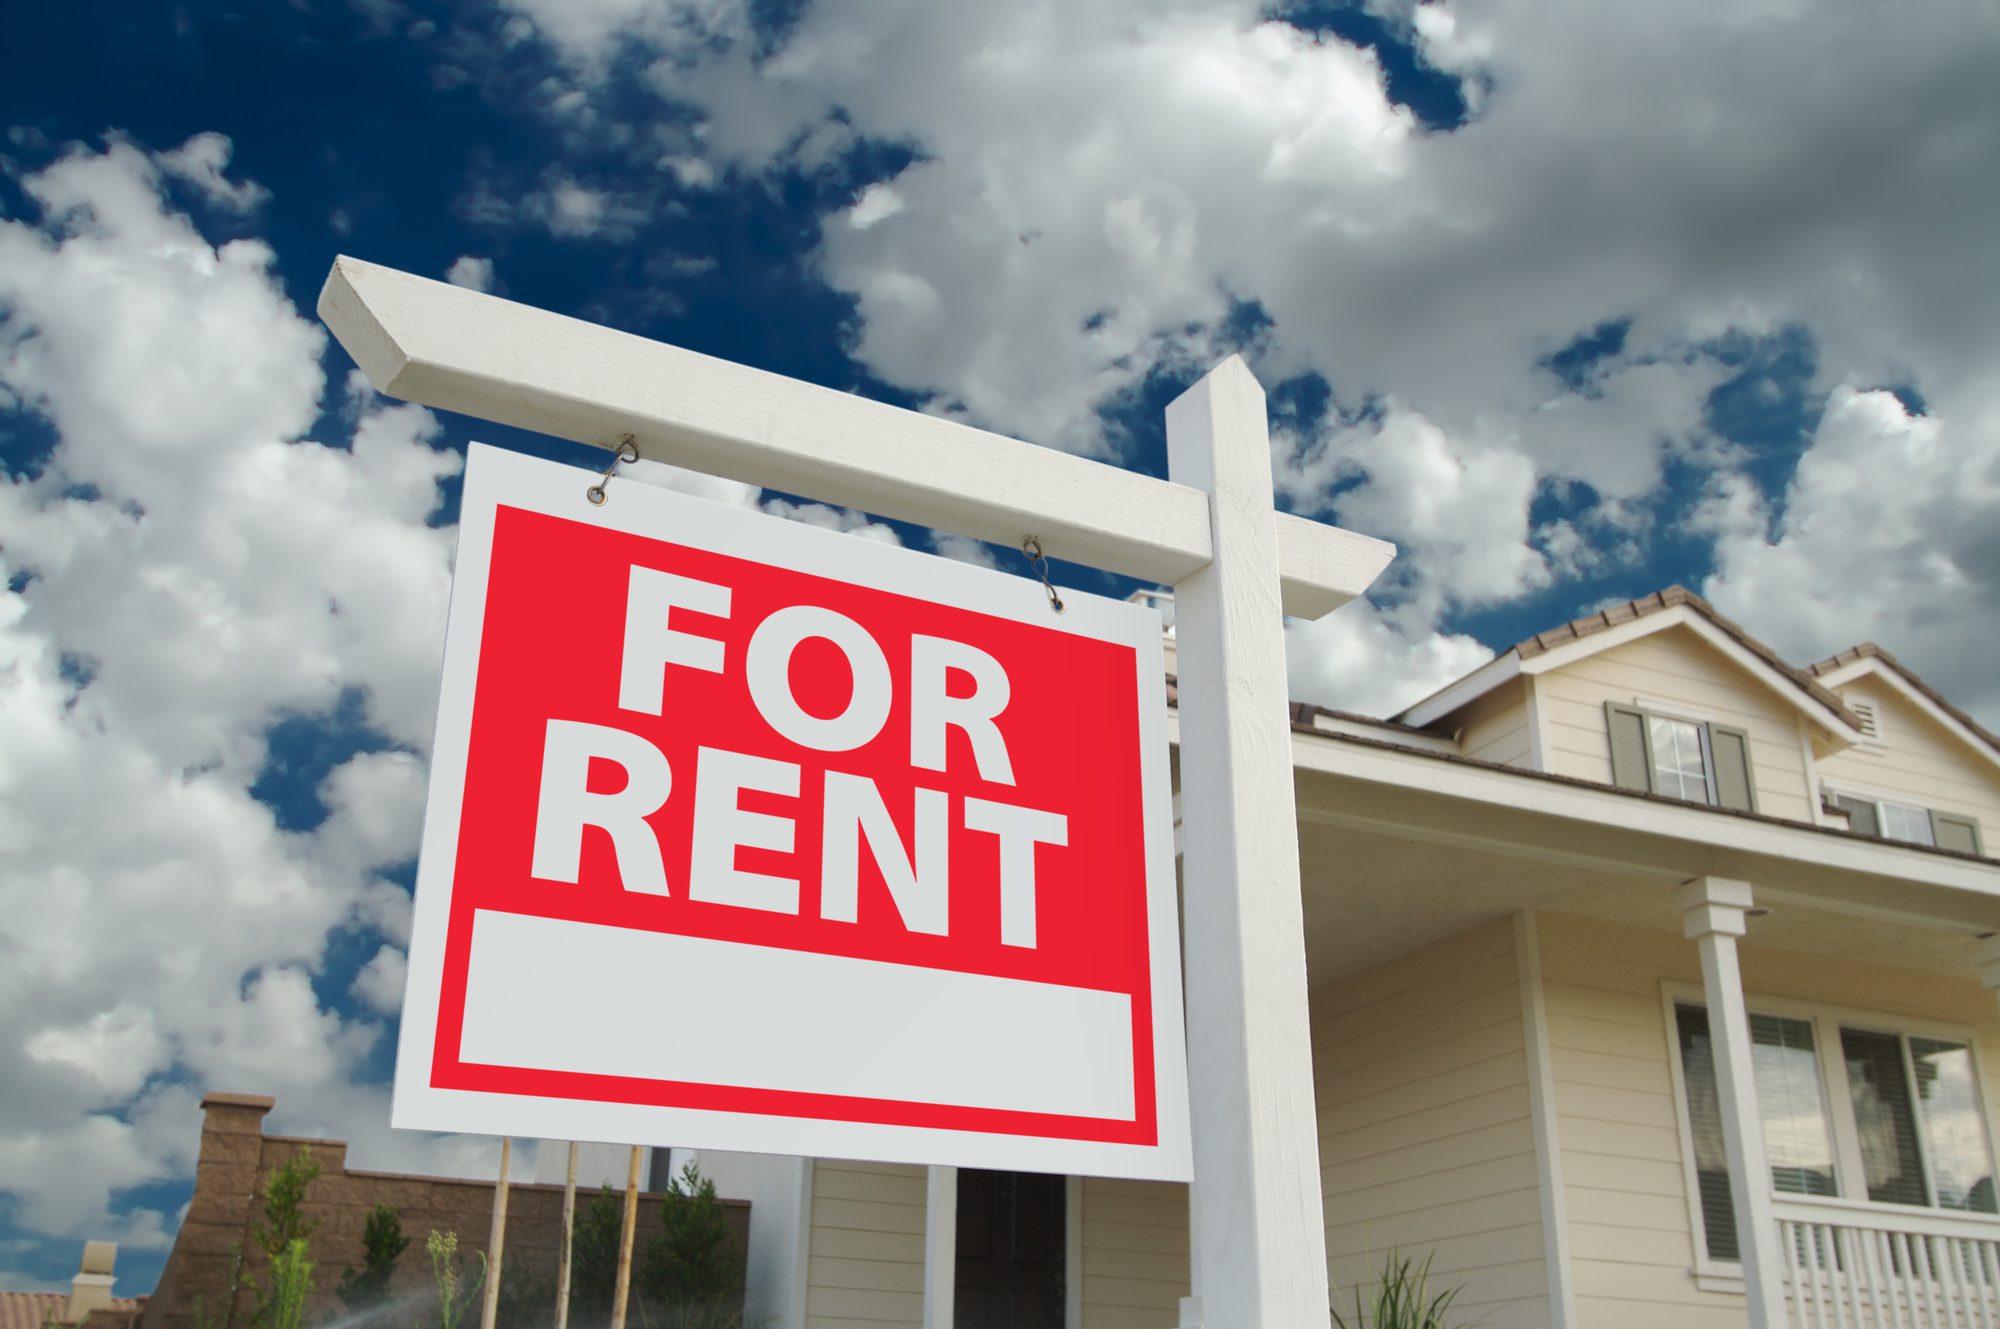 Homes for Rent in Charlotte, NC: What to Ask Before You Rent